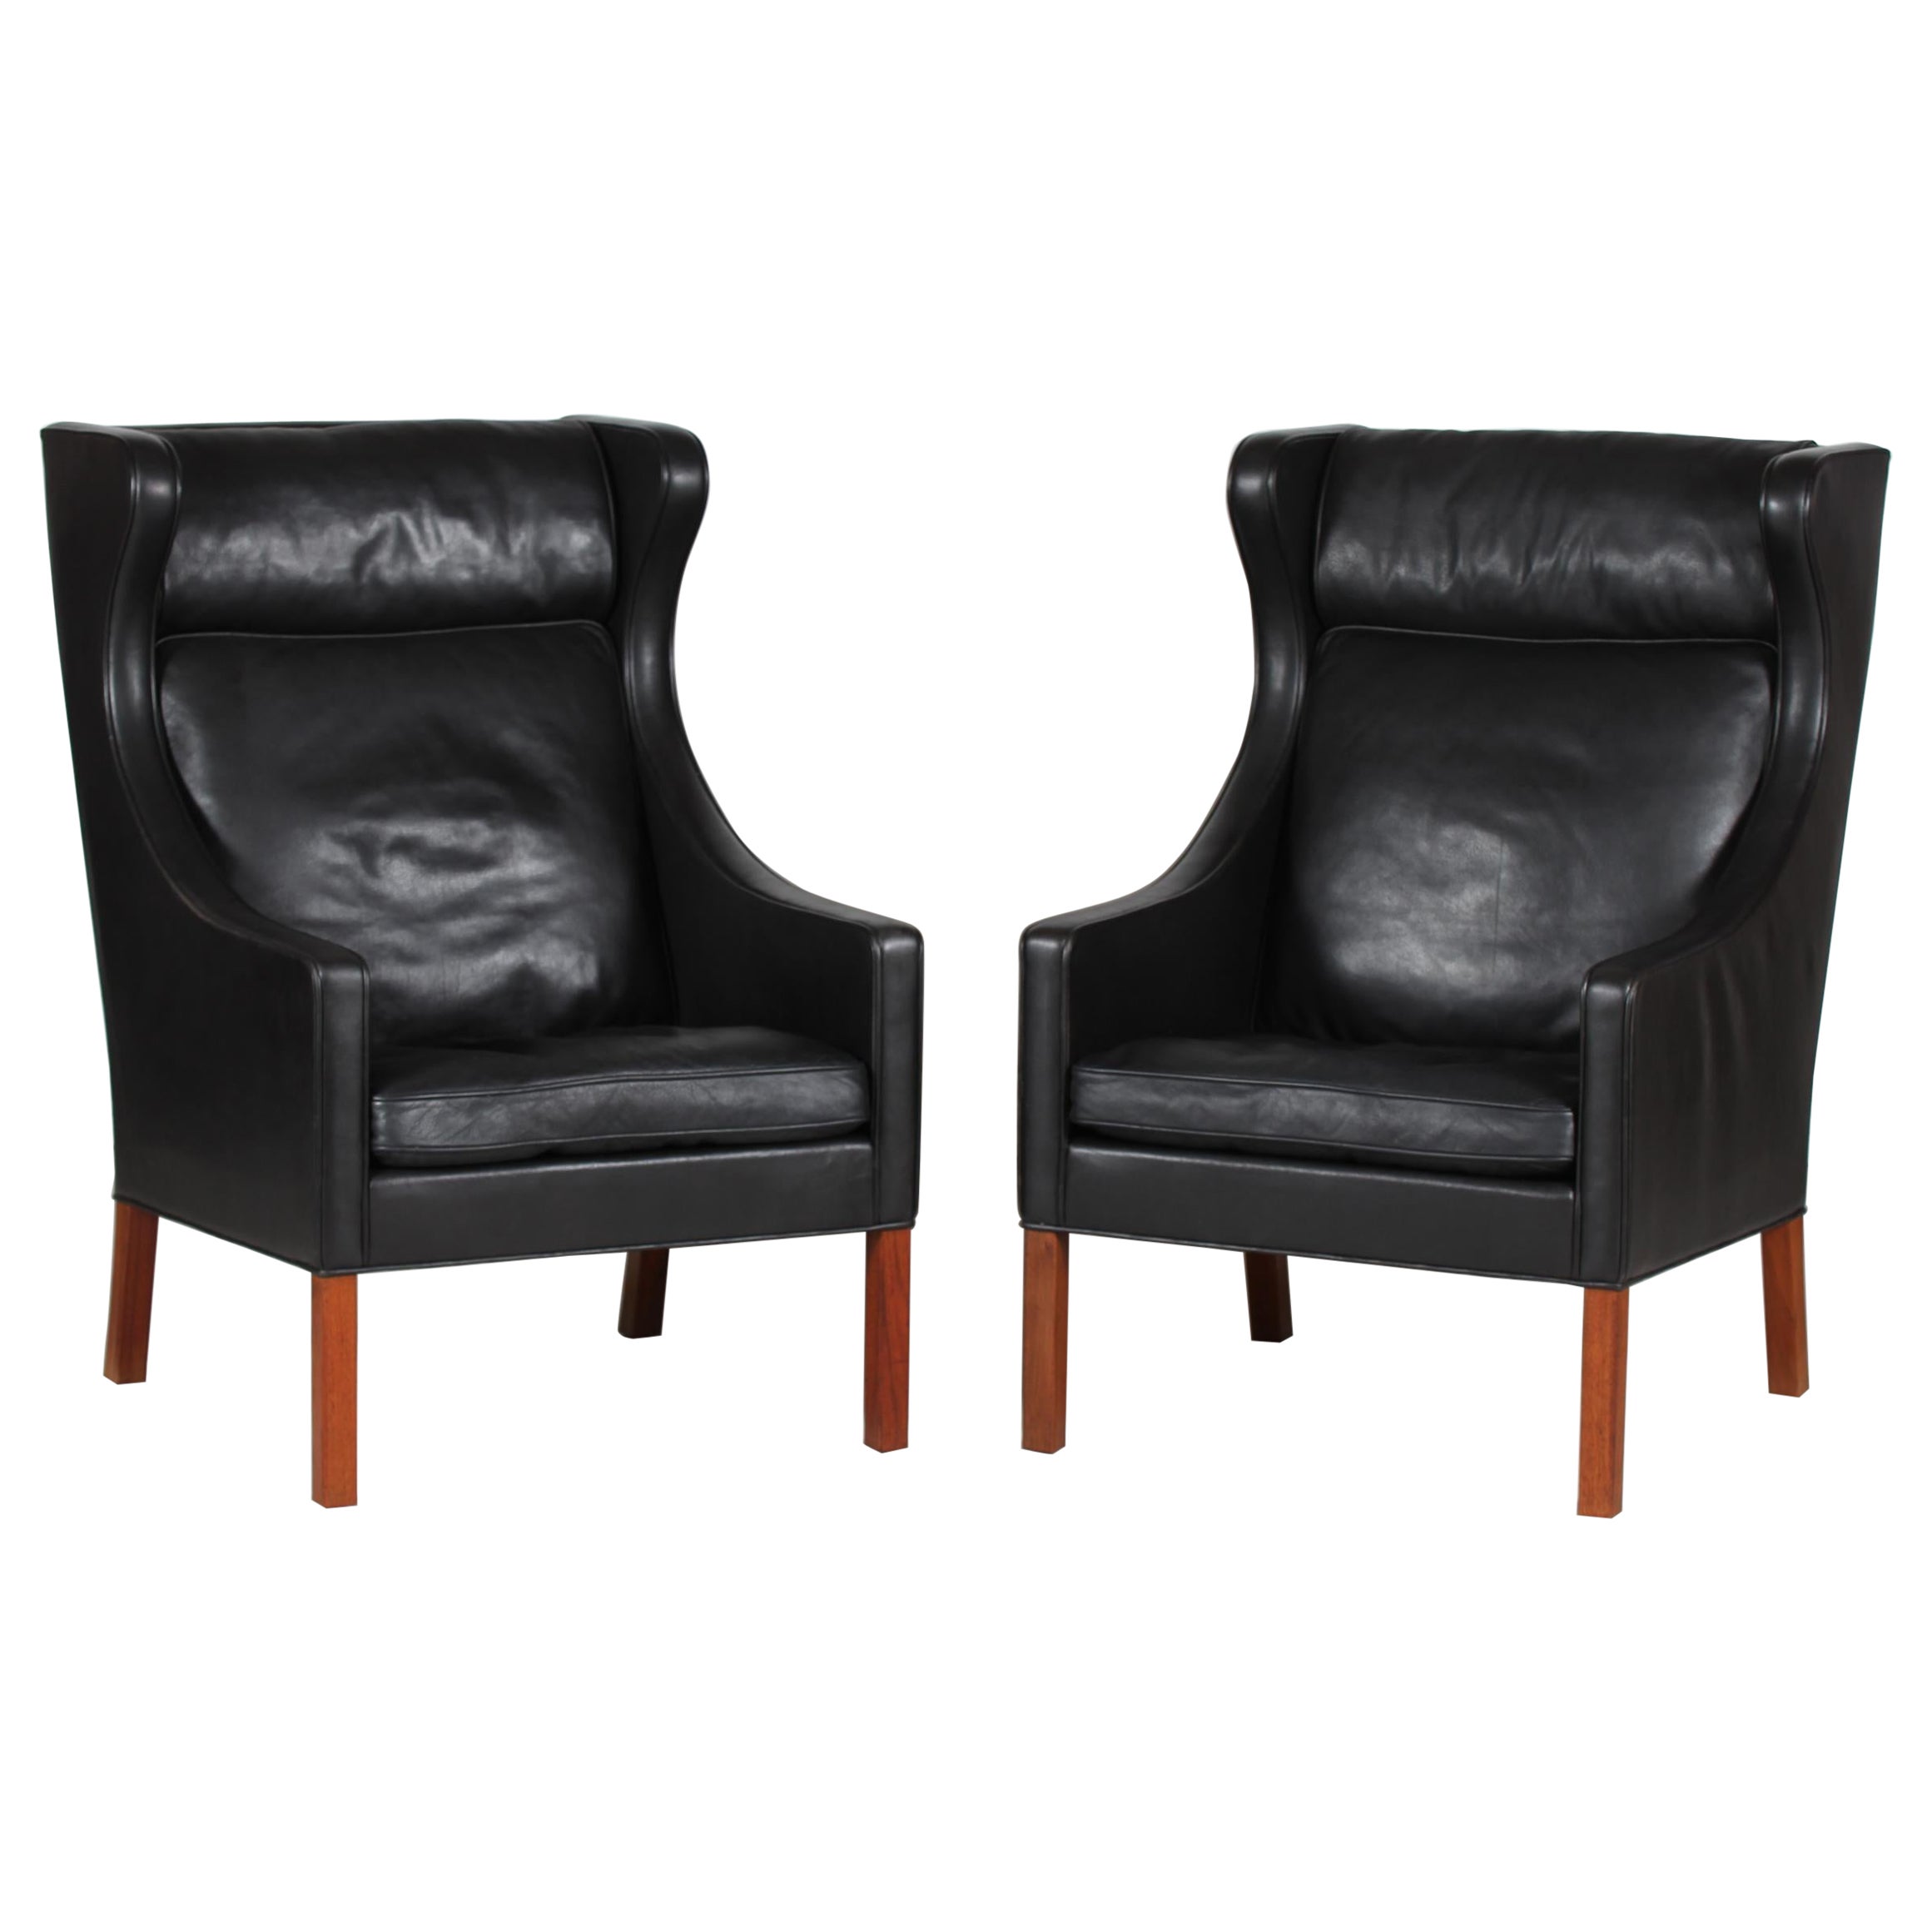 Børge Mogensen Pair of Chairs 2204 with Black Leather by Fredericia Stolefabrik